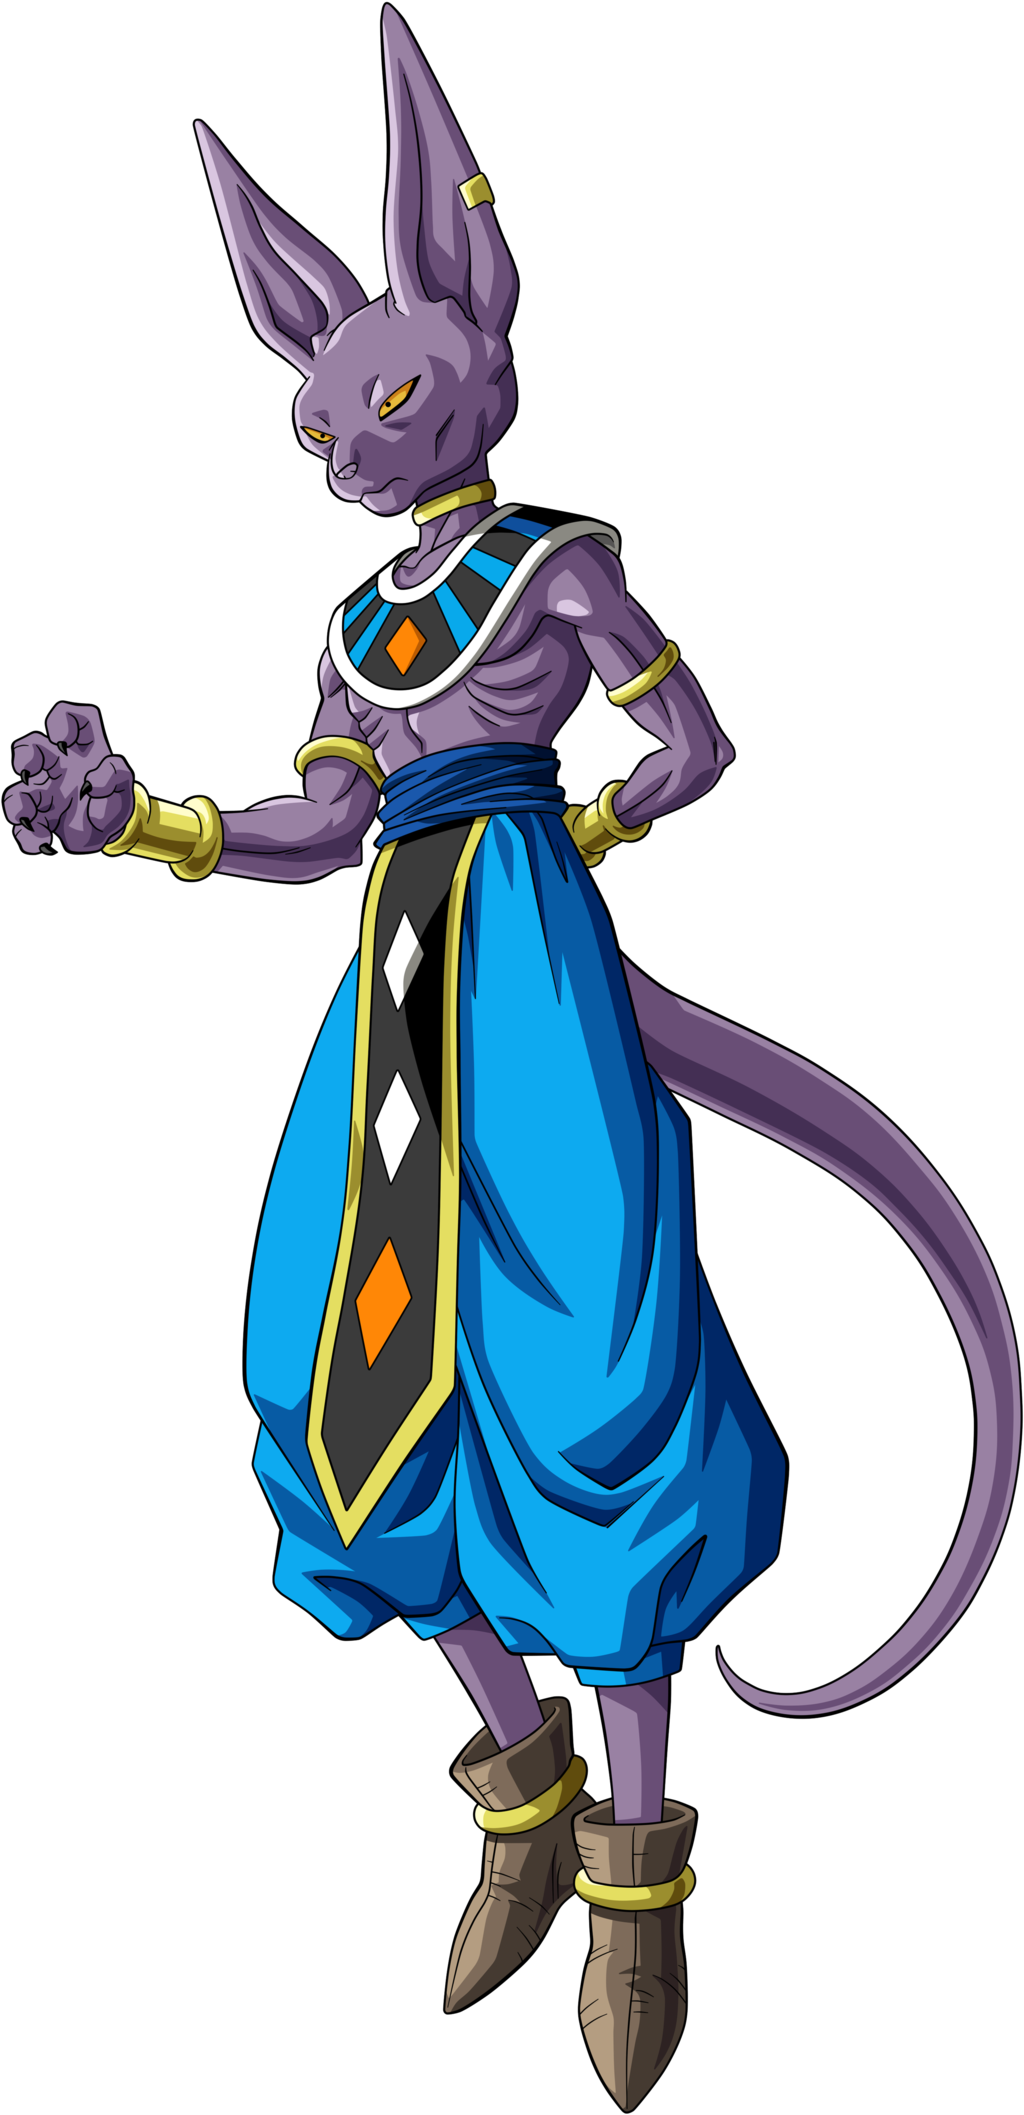 Welcome To Reddit, - Dragon Ball Z Beerus (1130x2152)